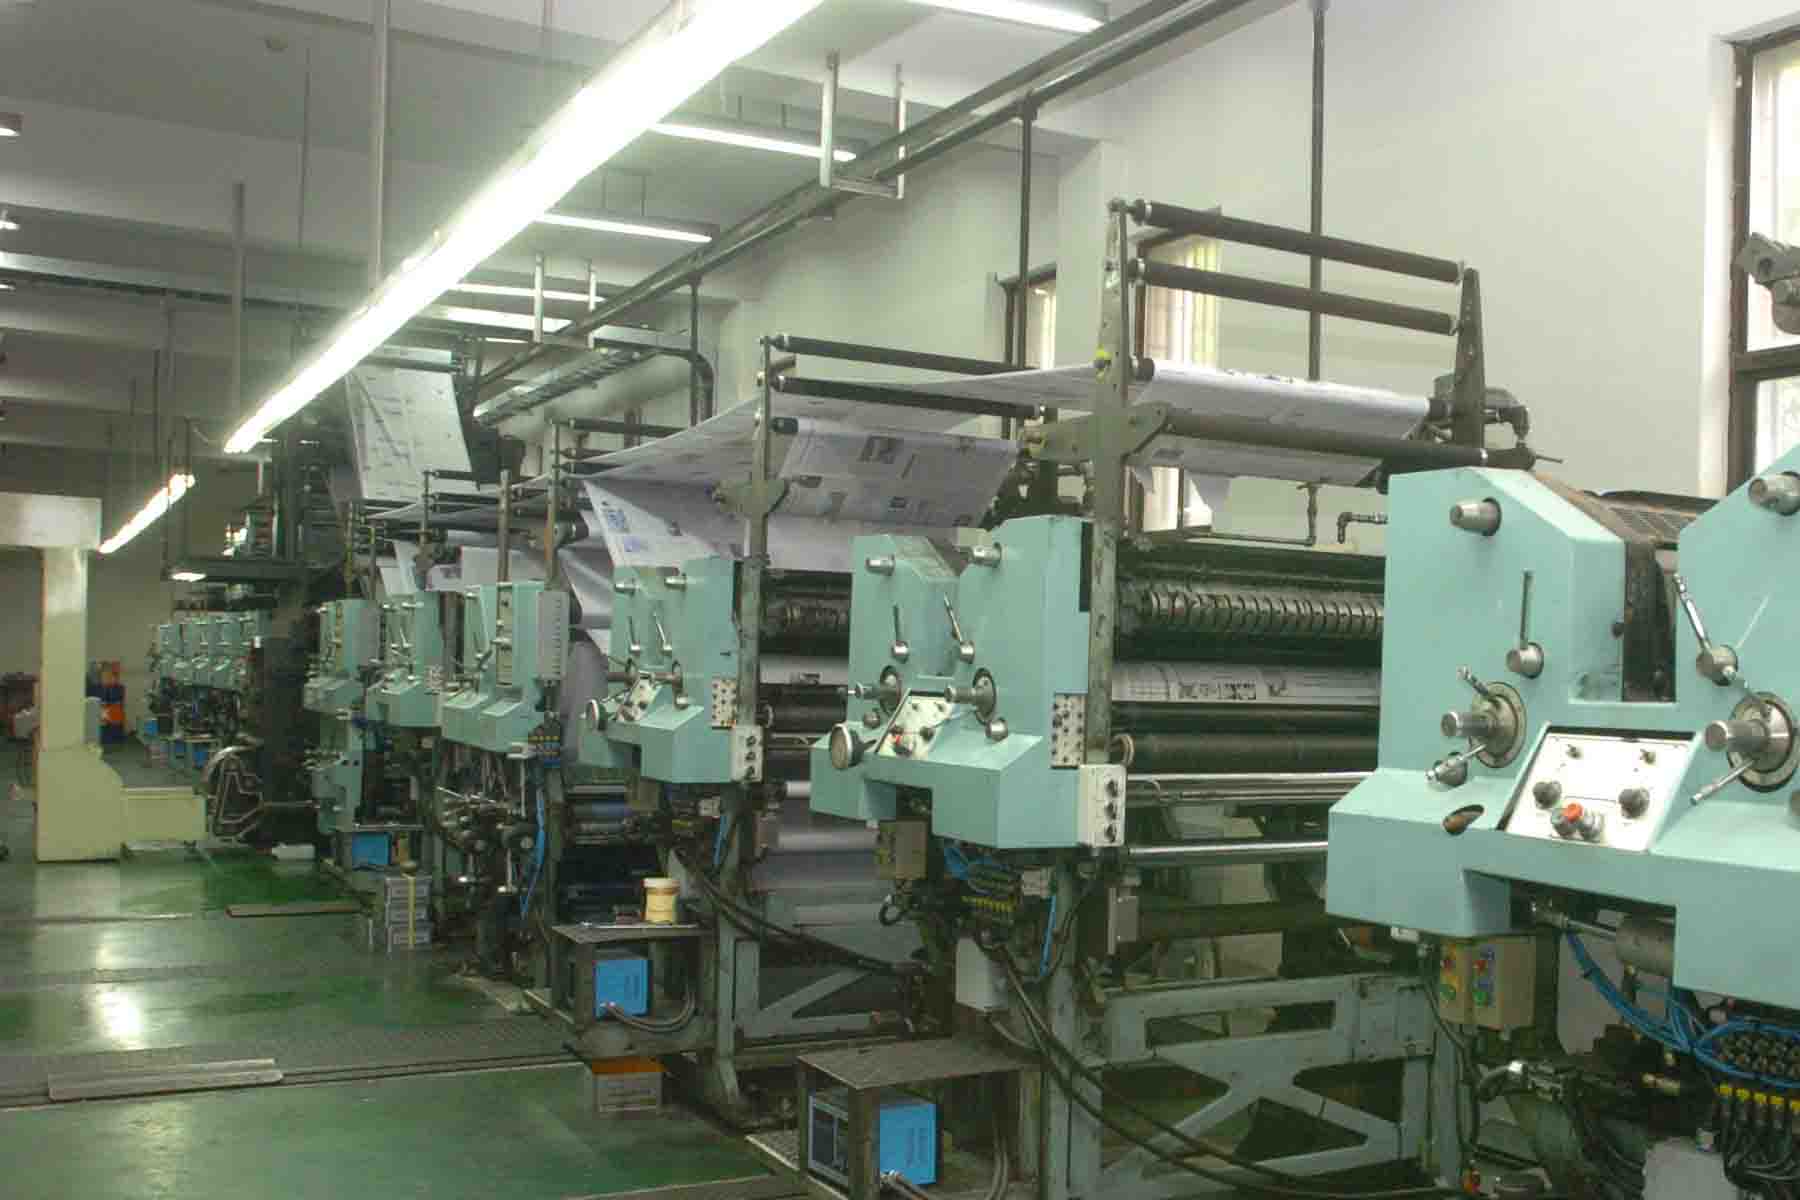  Print And Printing (Newspaper) Line Machinery (Et impression (journal) Machinery Line)